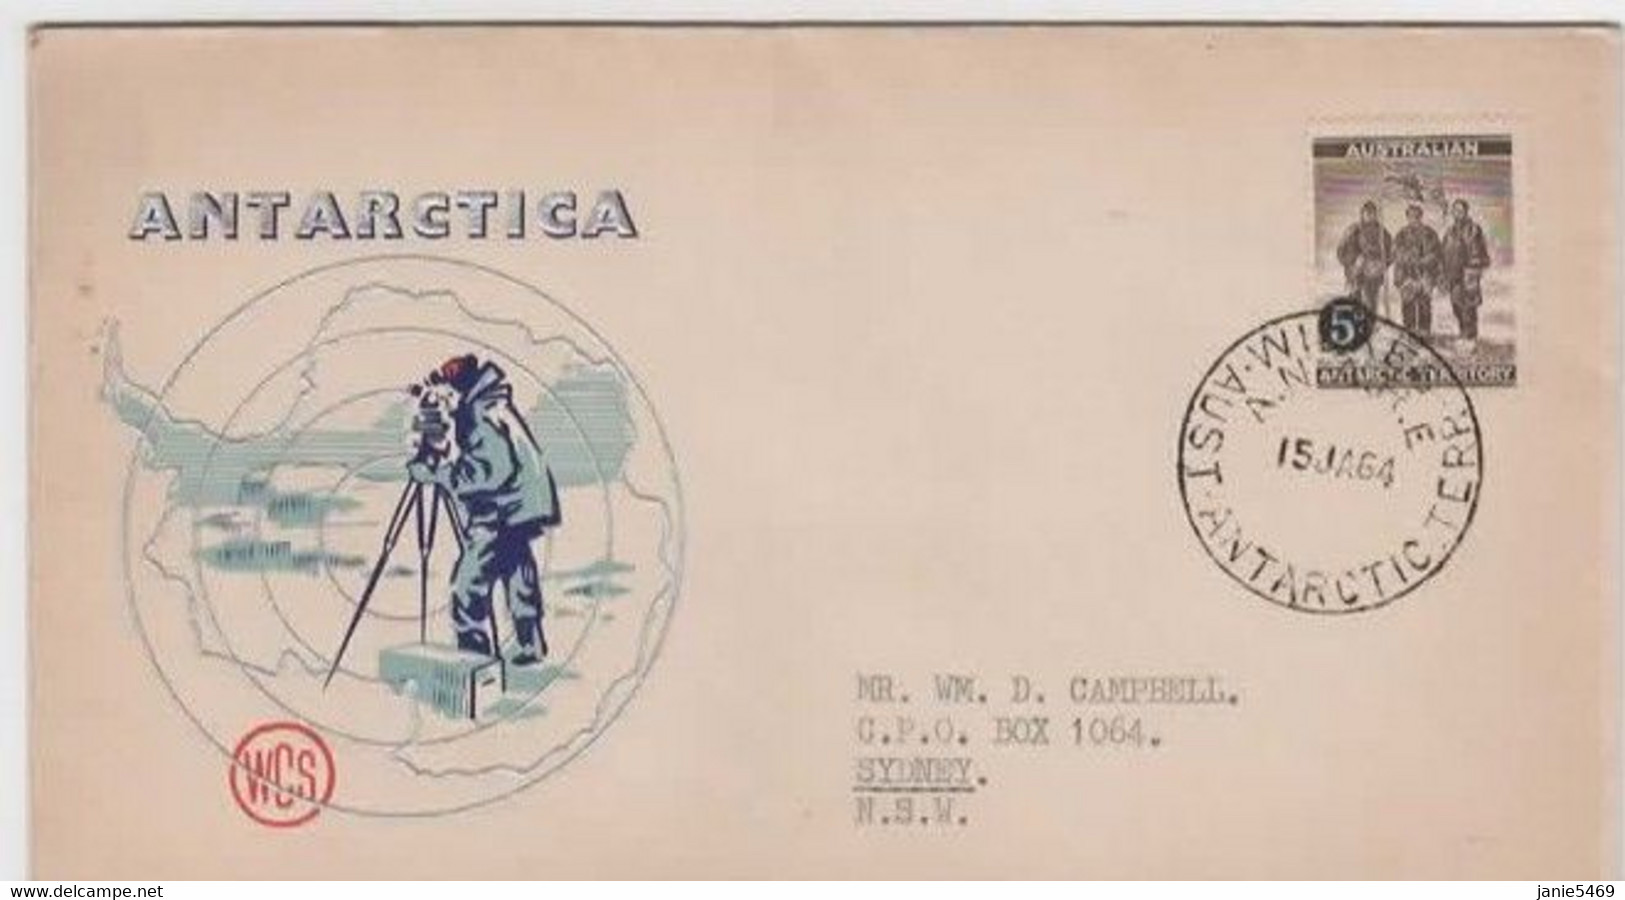 Australian Antarctic Territory,1964 5d Definitive Wilkes Base Postmark,WCS First Day Cover - FDC